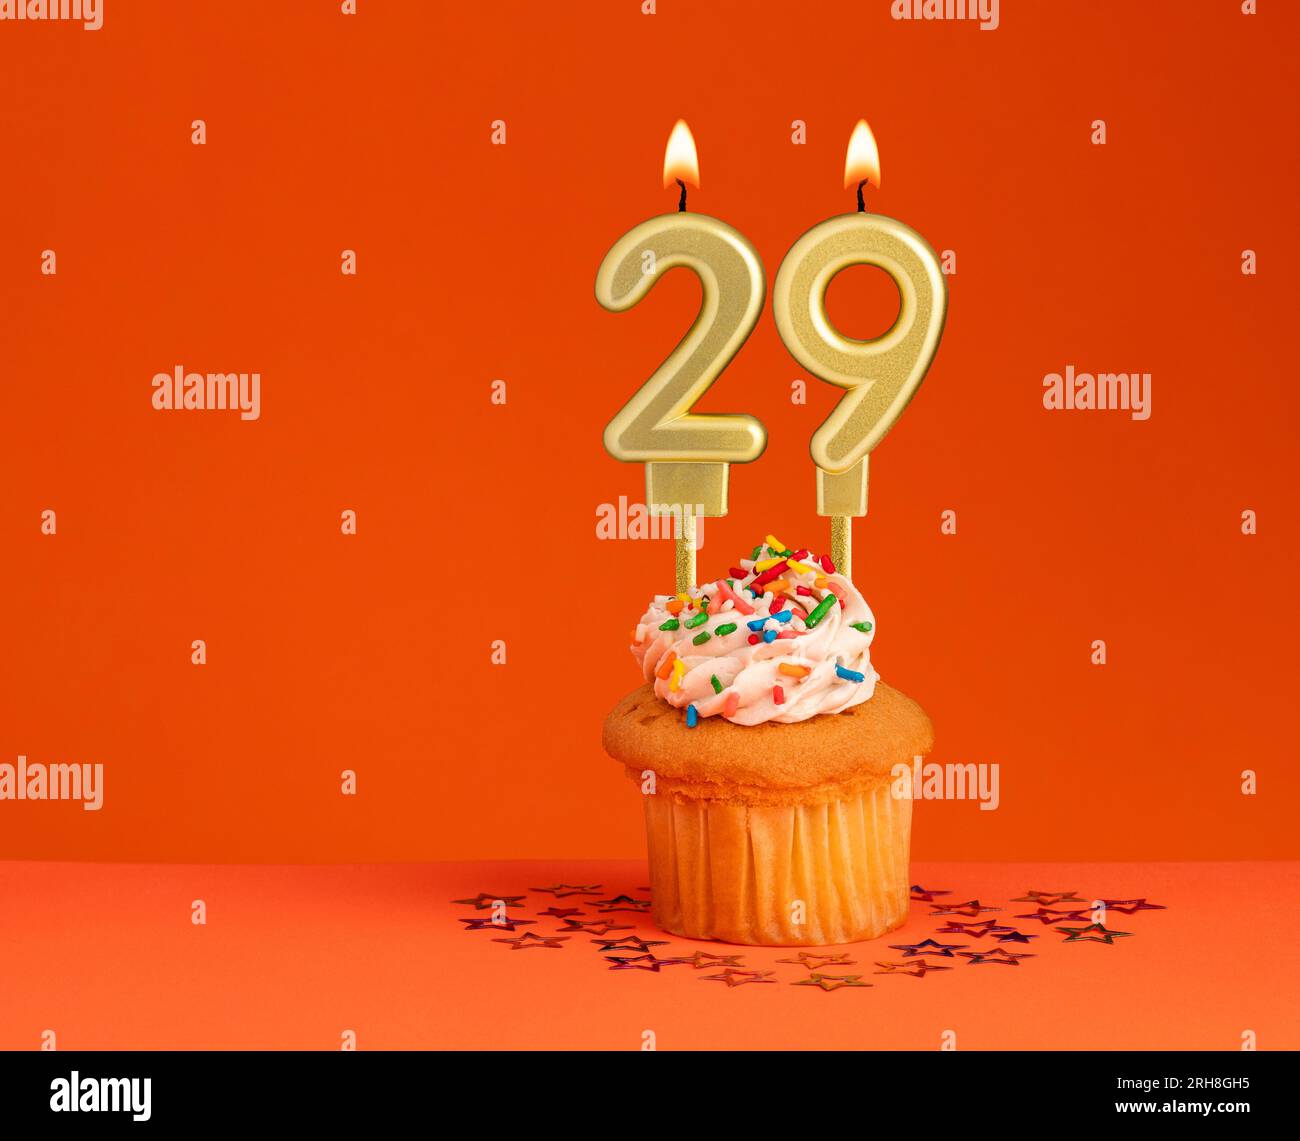 Number 29 candle - Birthday card design in orange background Stock Photo